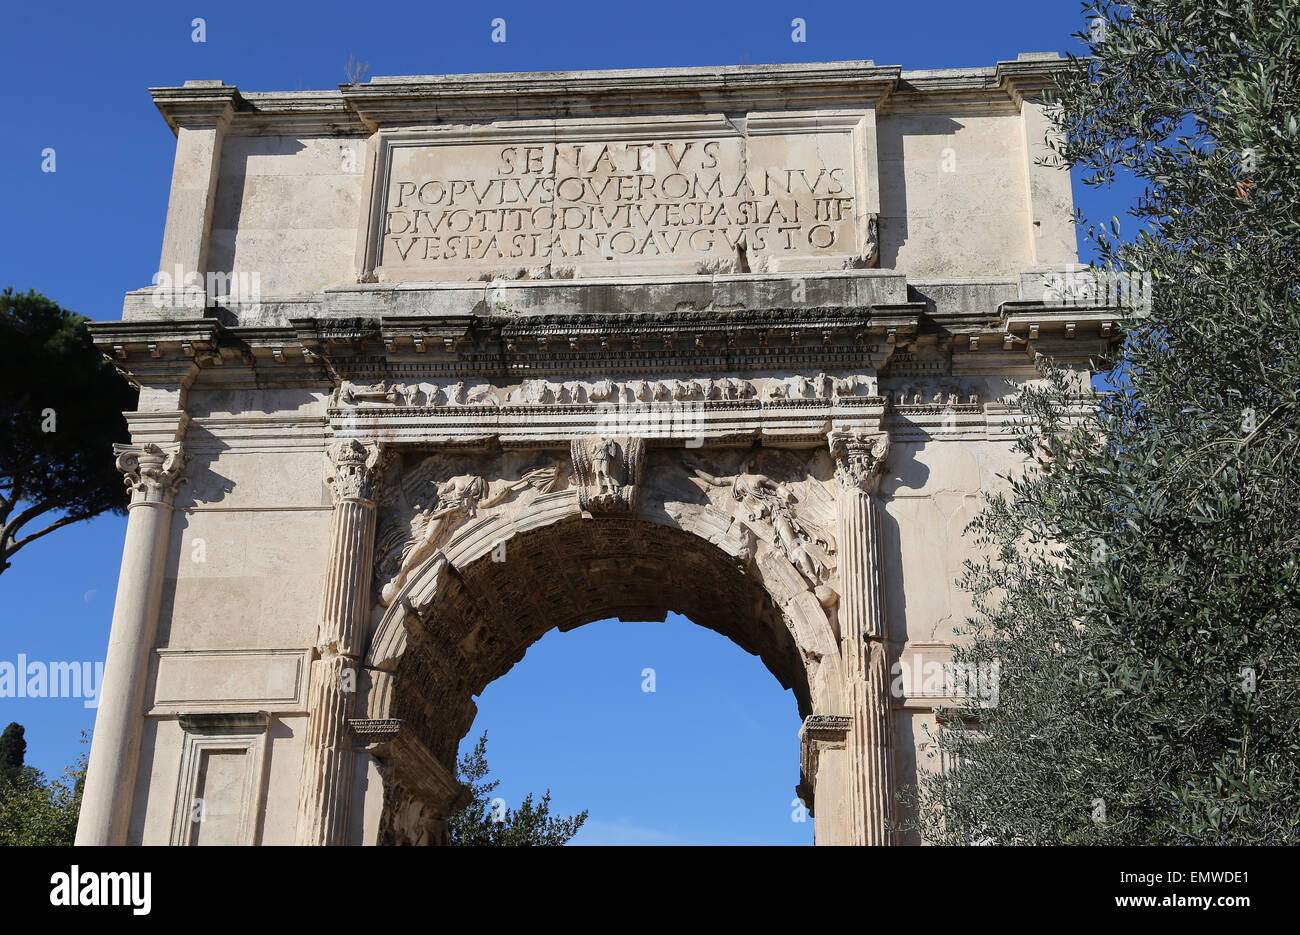 Italy. Rome. Arch of Titus. Constructed in 82 AD by the emperor Domitian to commemorate Titus' victories. Stock Photo